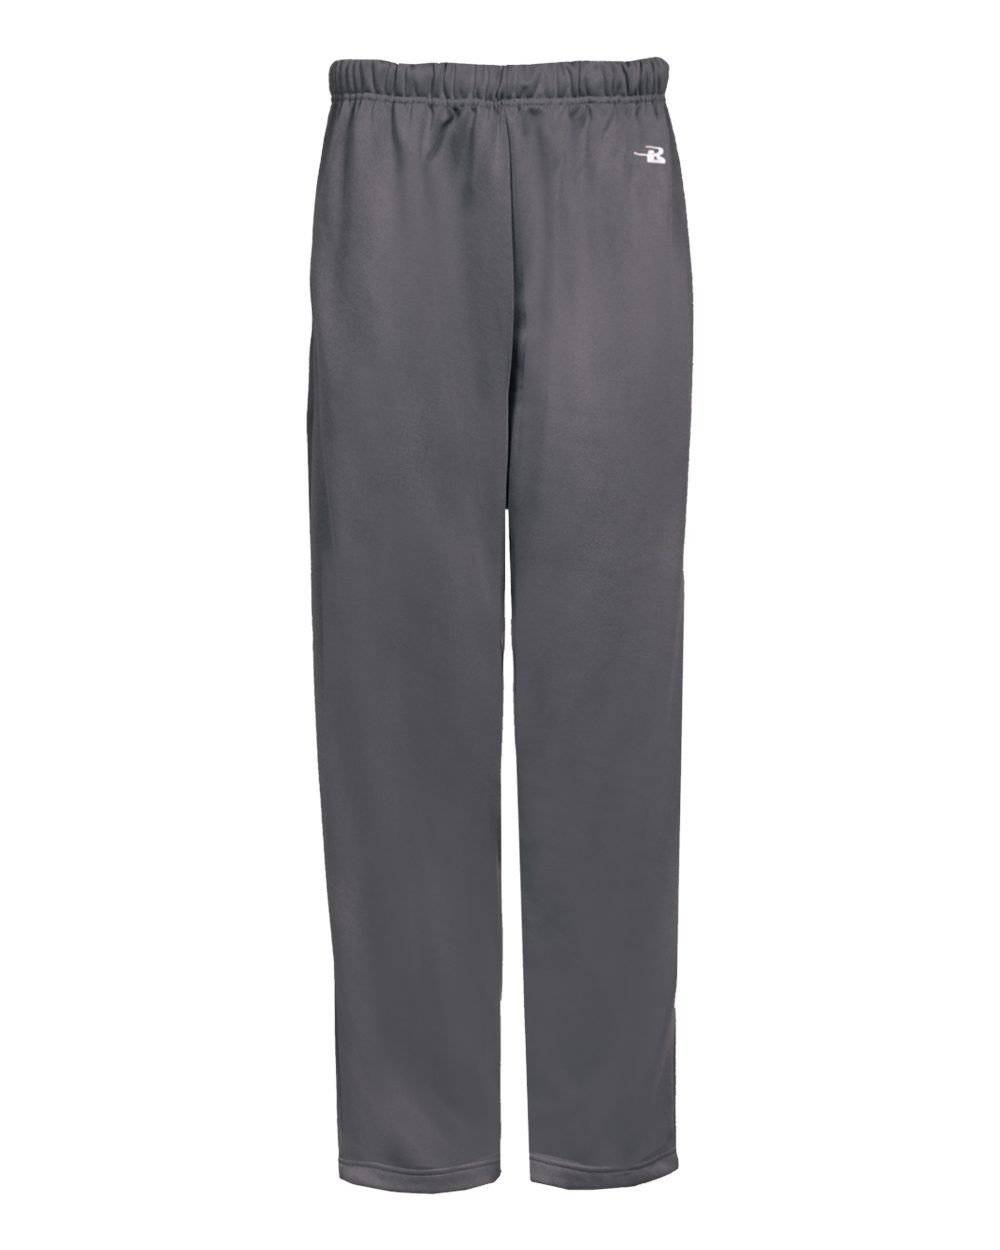 Badger Sport 1478 Performance Open Bottom Pant - Graphite - HIT a Double - 1